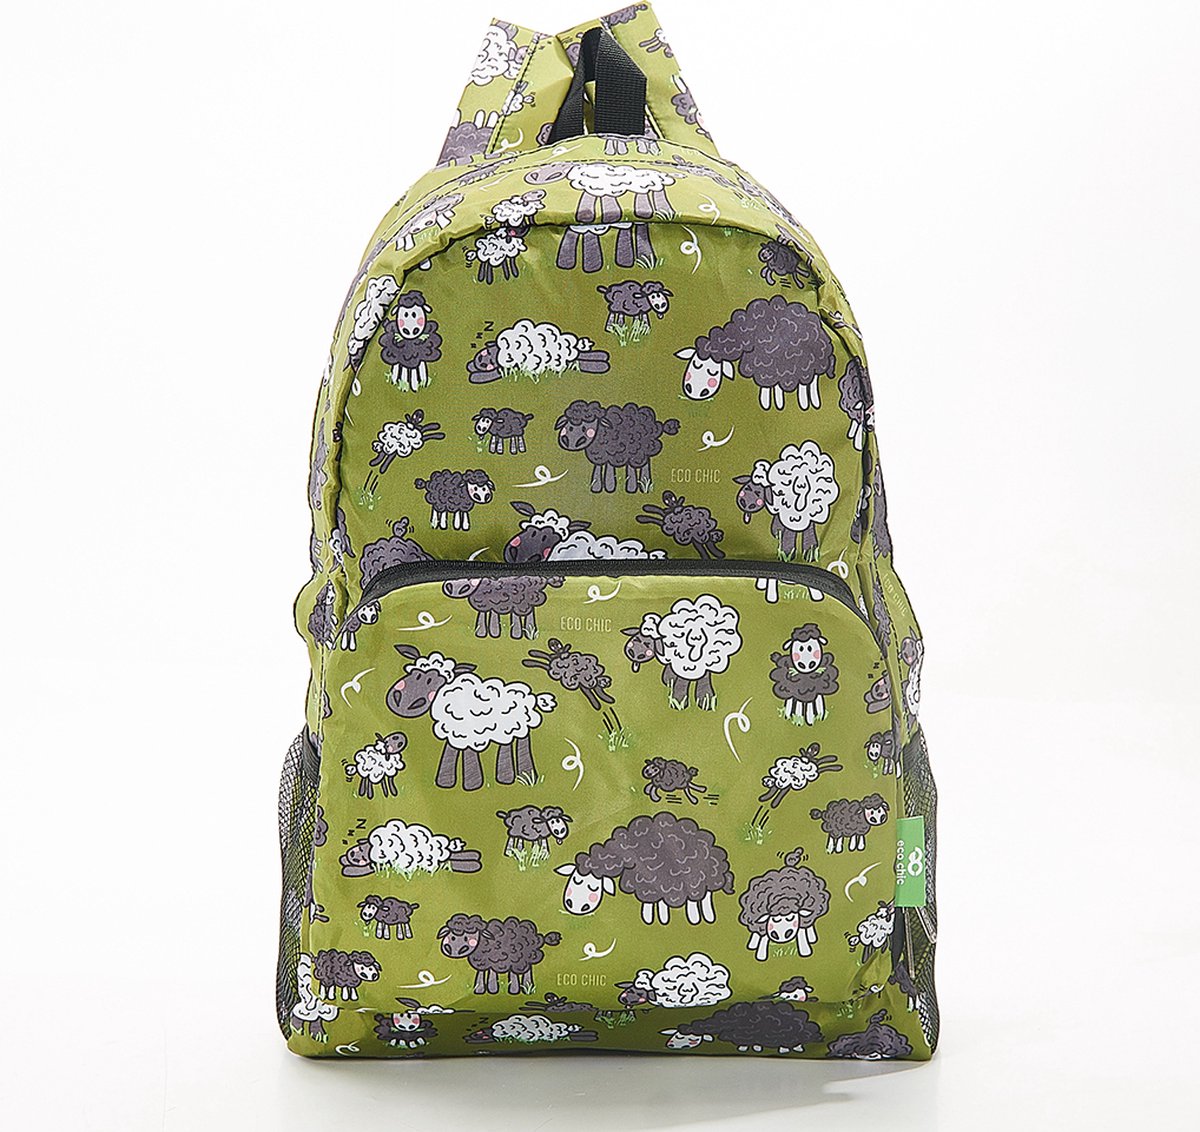 Eco Chic - Backpack - B26GN - Green - Sheep*